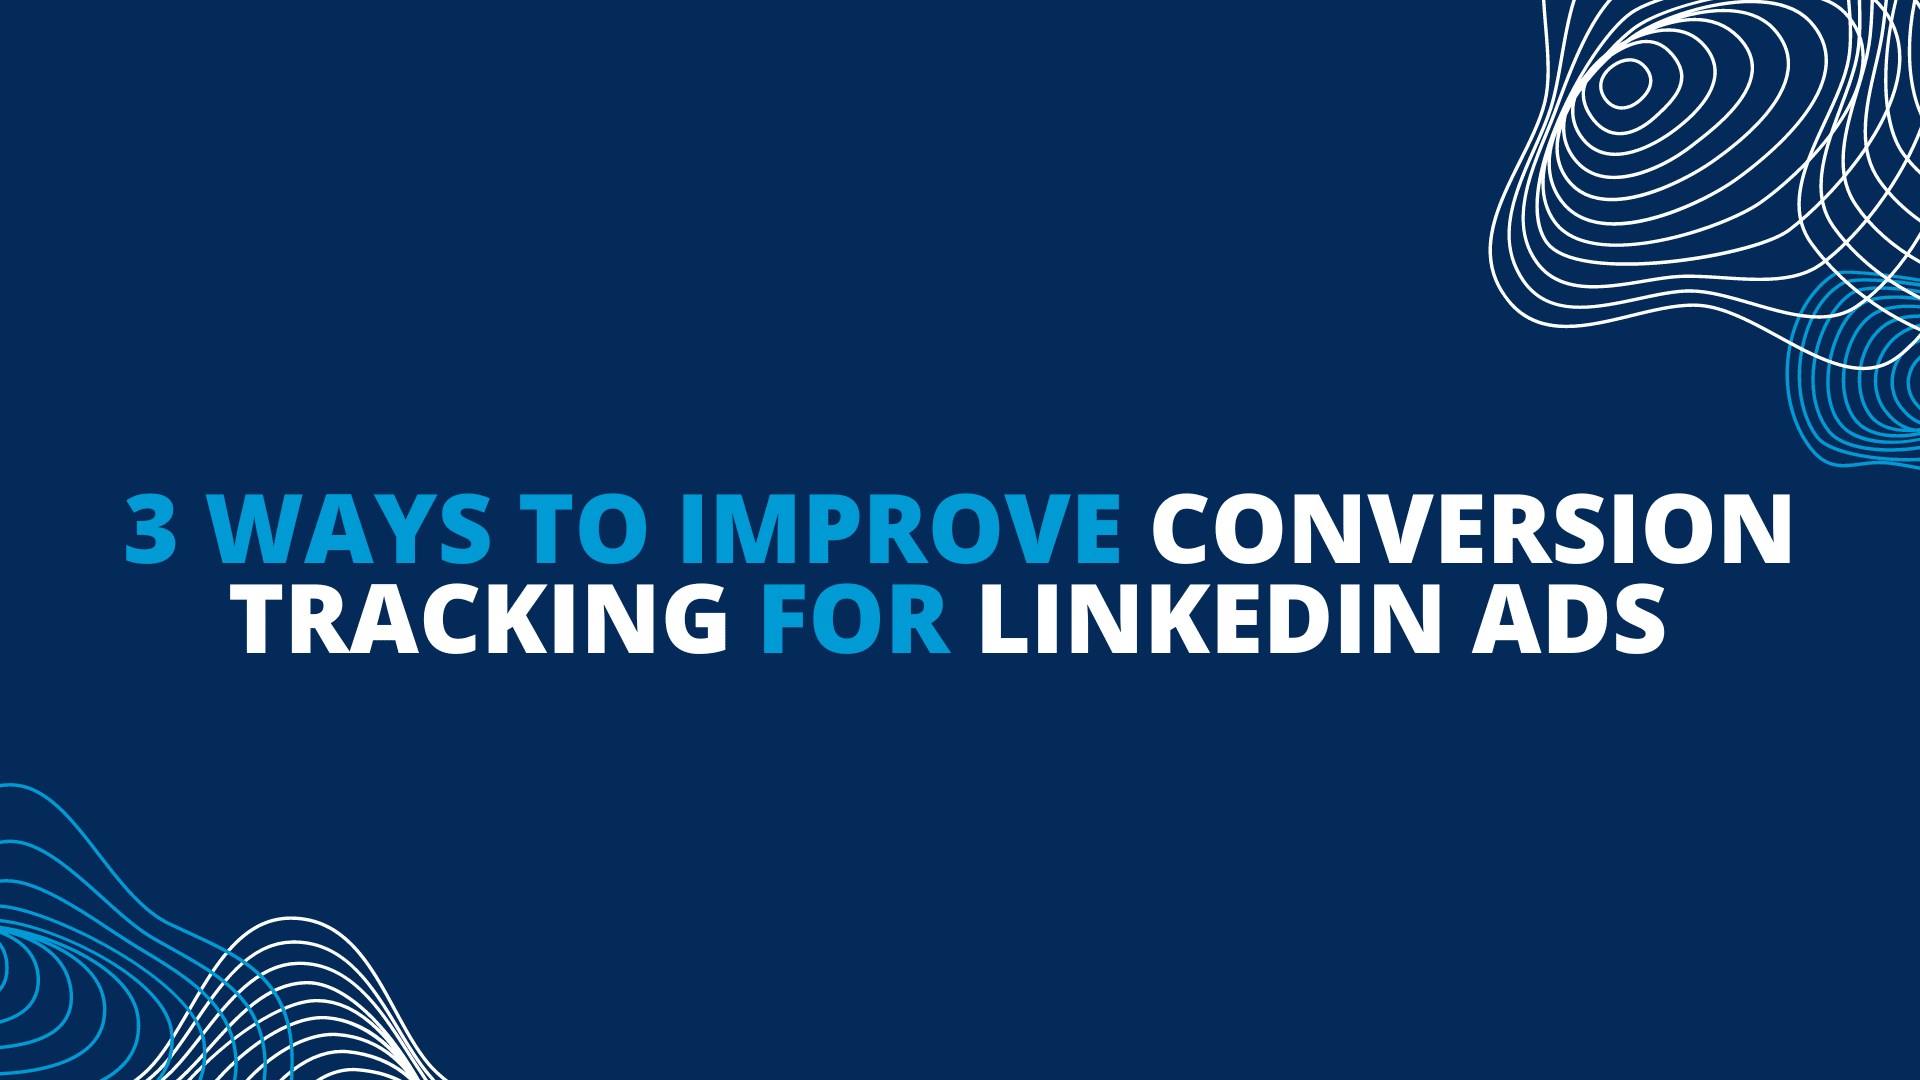 Ways to Improve Conversion Tracking for LinkedIn Ads